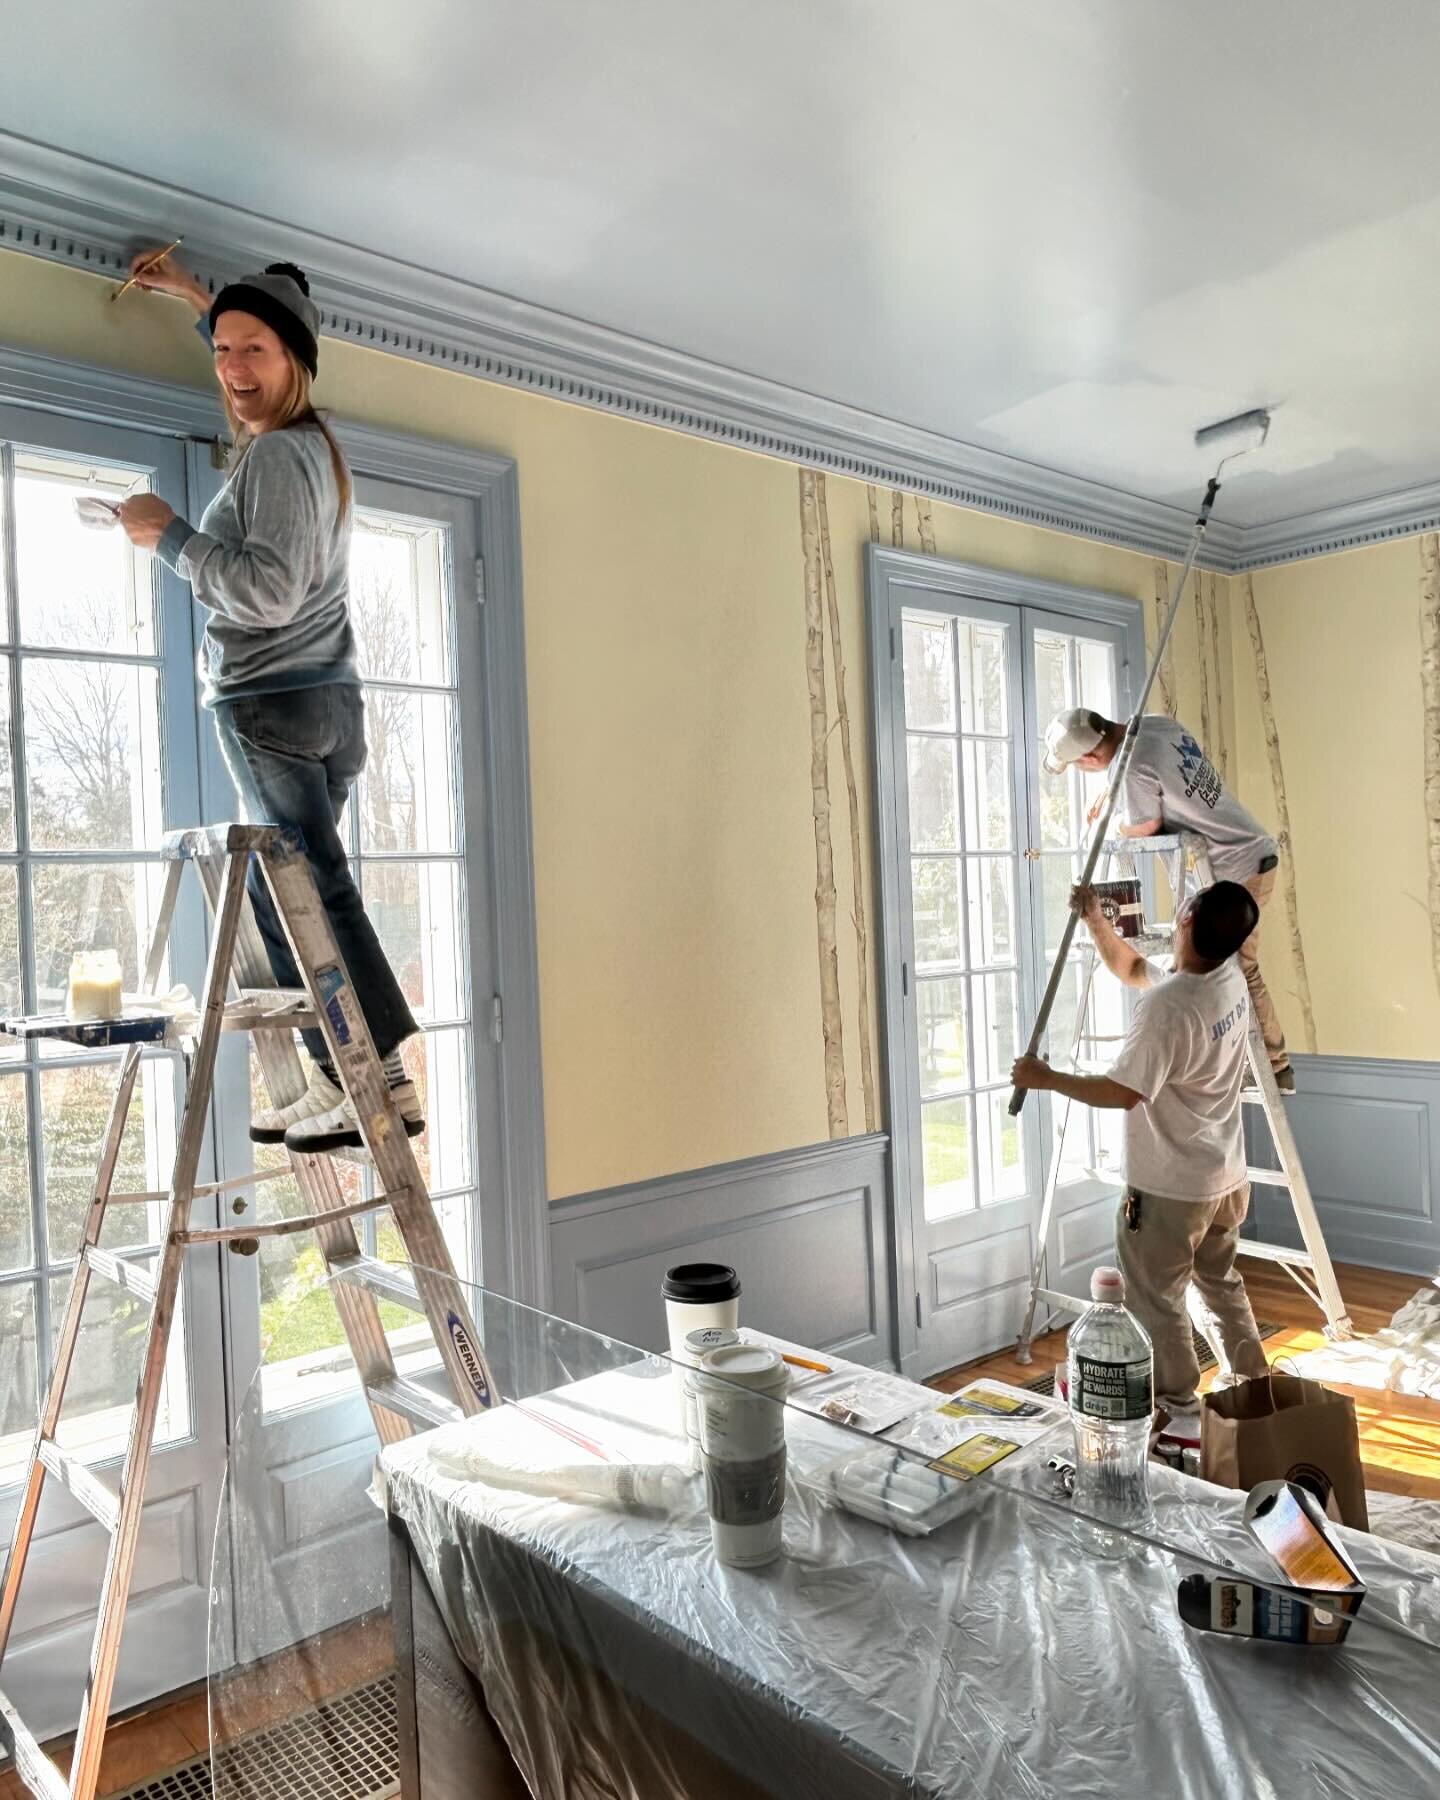 I so appreciate nature on these walls, the warm sunlight beaming in and my amazing/talented team during this work in progress. 🎨 #dcathe203project #darien #interiordesign #diningroom @cottagesgardens @dariendca @lorileckliter